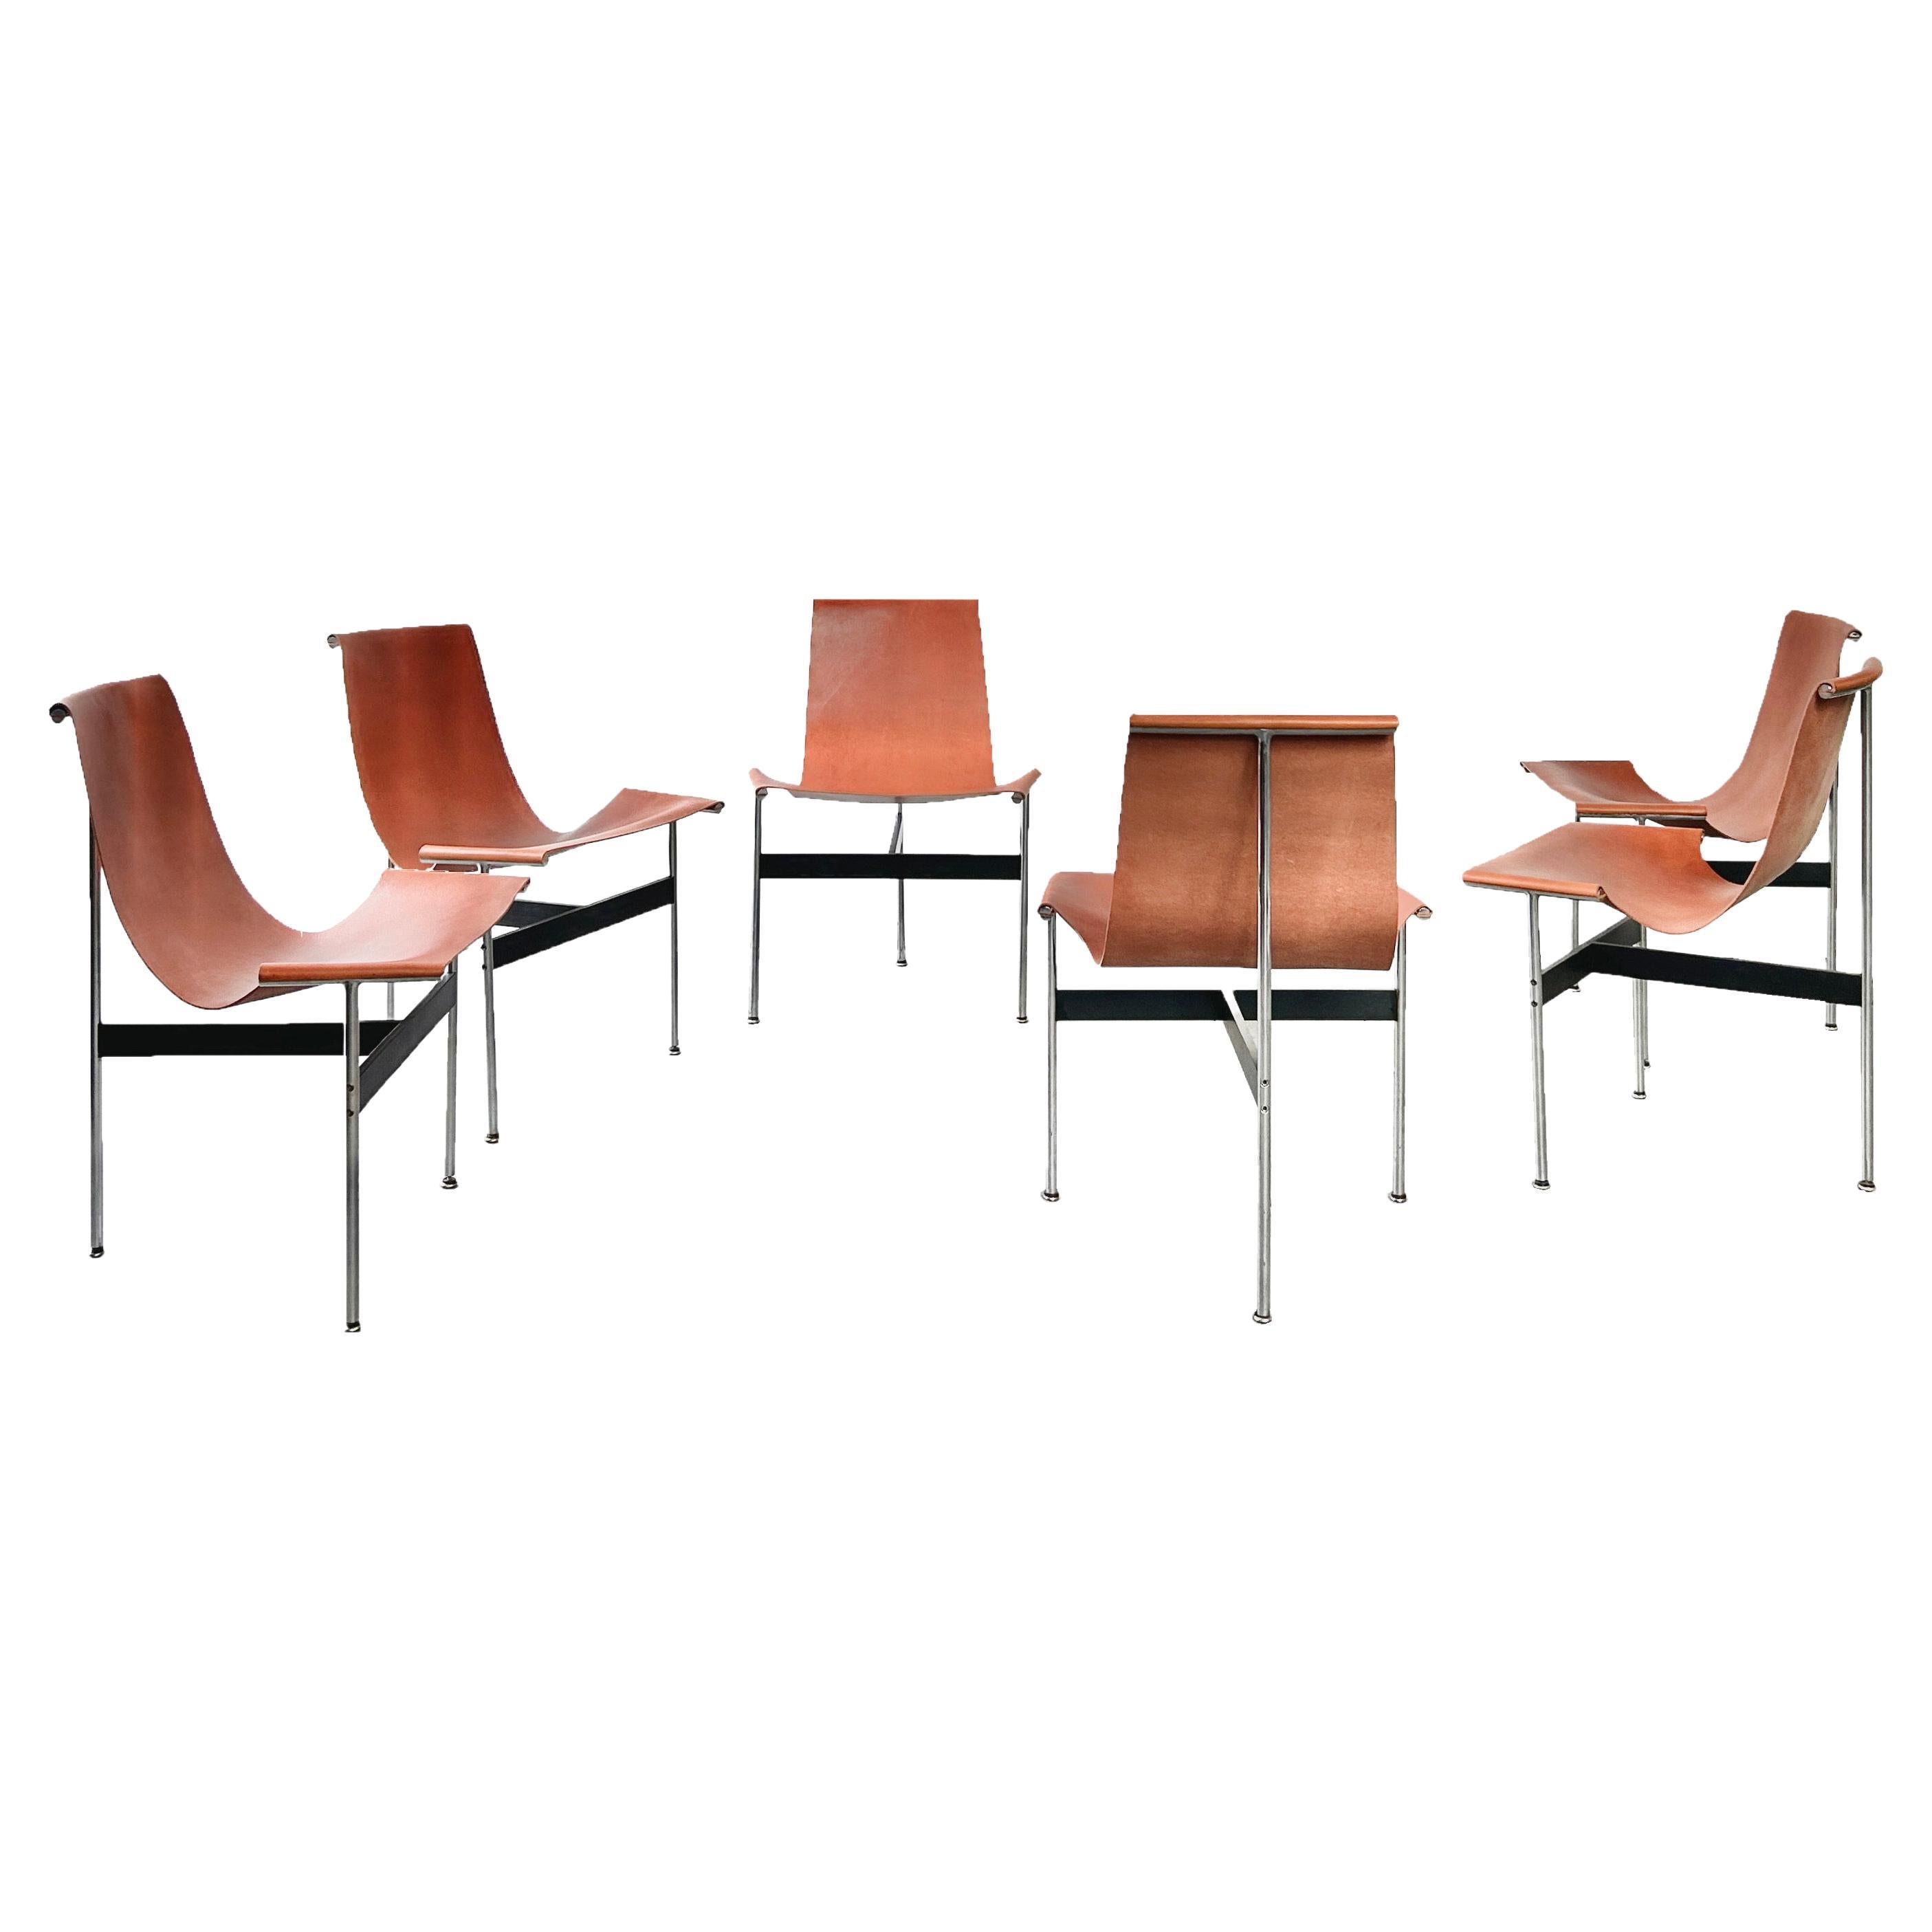 Set of 6 T-chairs designed by Katavolos Litell & Kelley in 1952